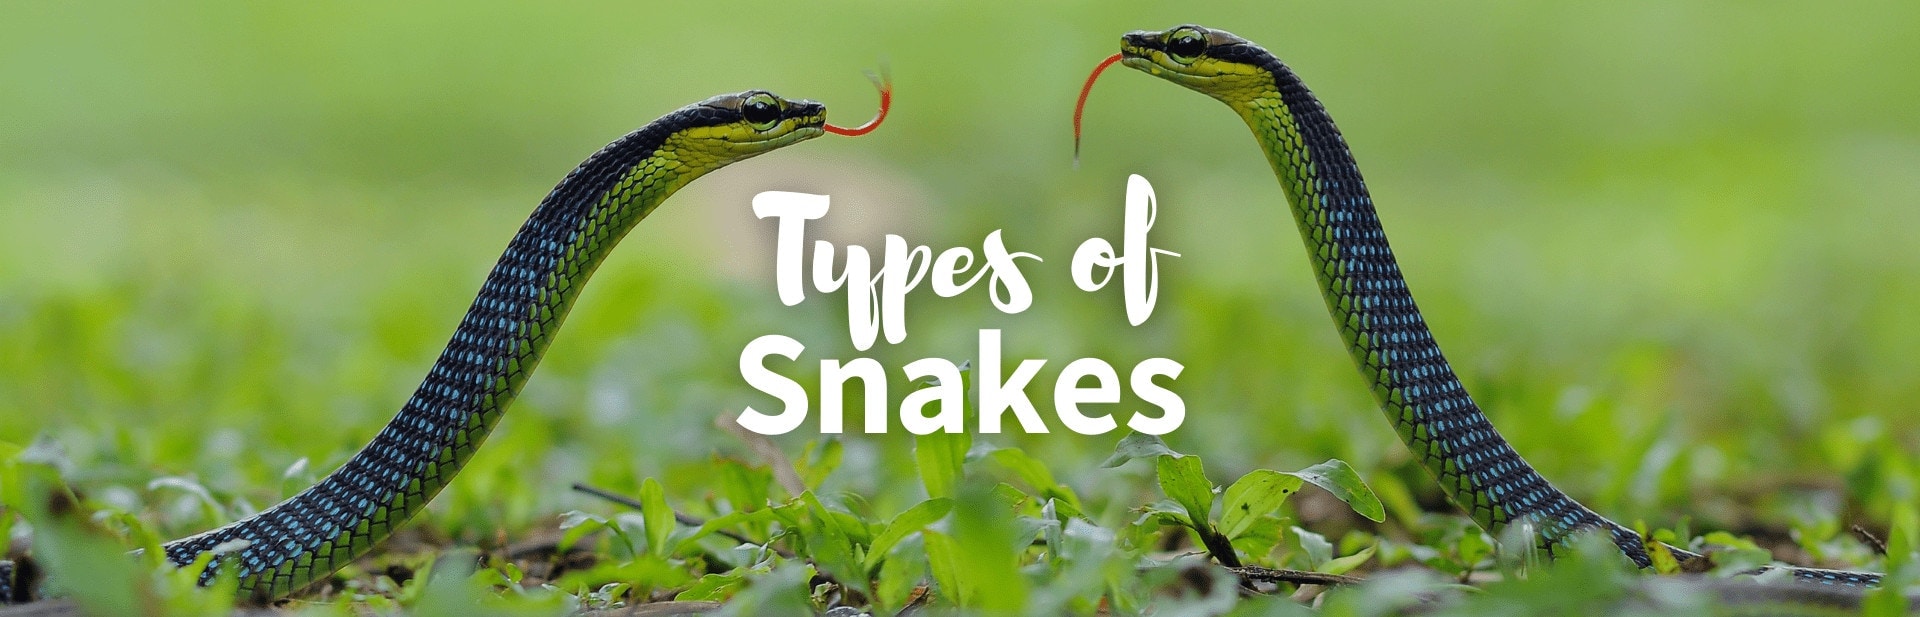 25 Amazing Types of Snakes (Photos, Fun Facts & More!)